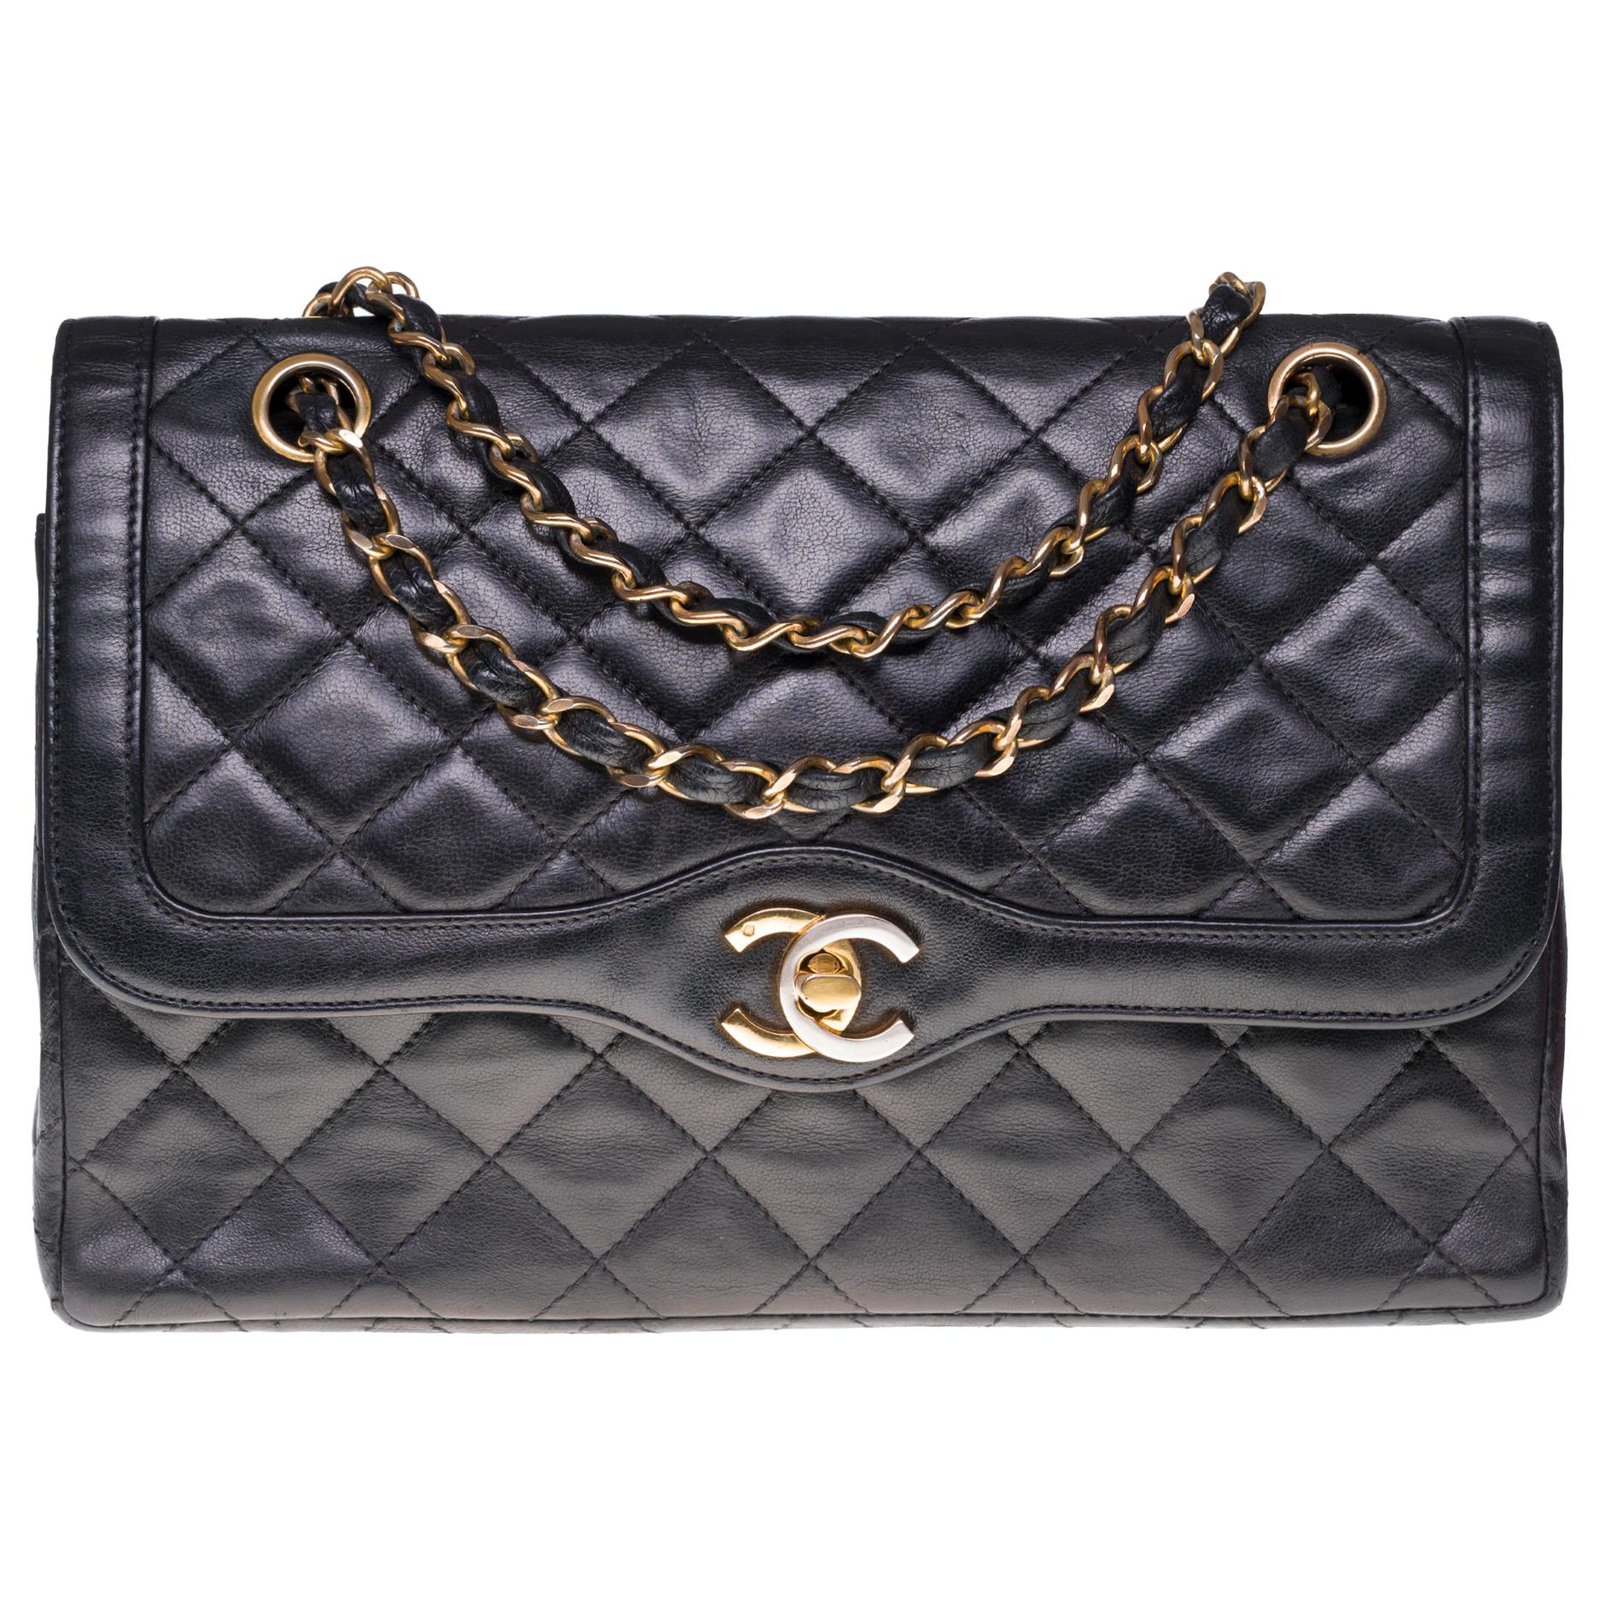 Timeless Chanel Classic bag in black quilted lambskin, garniture